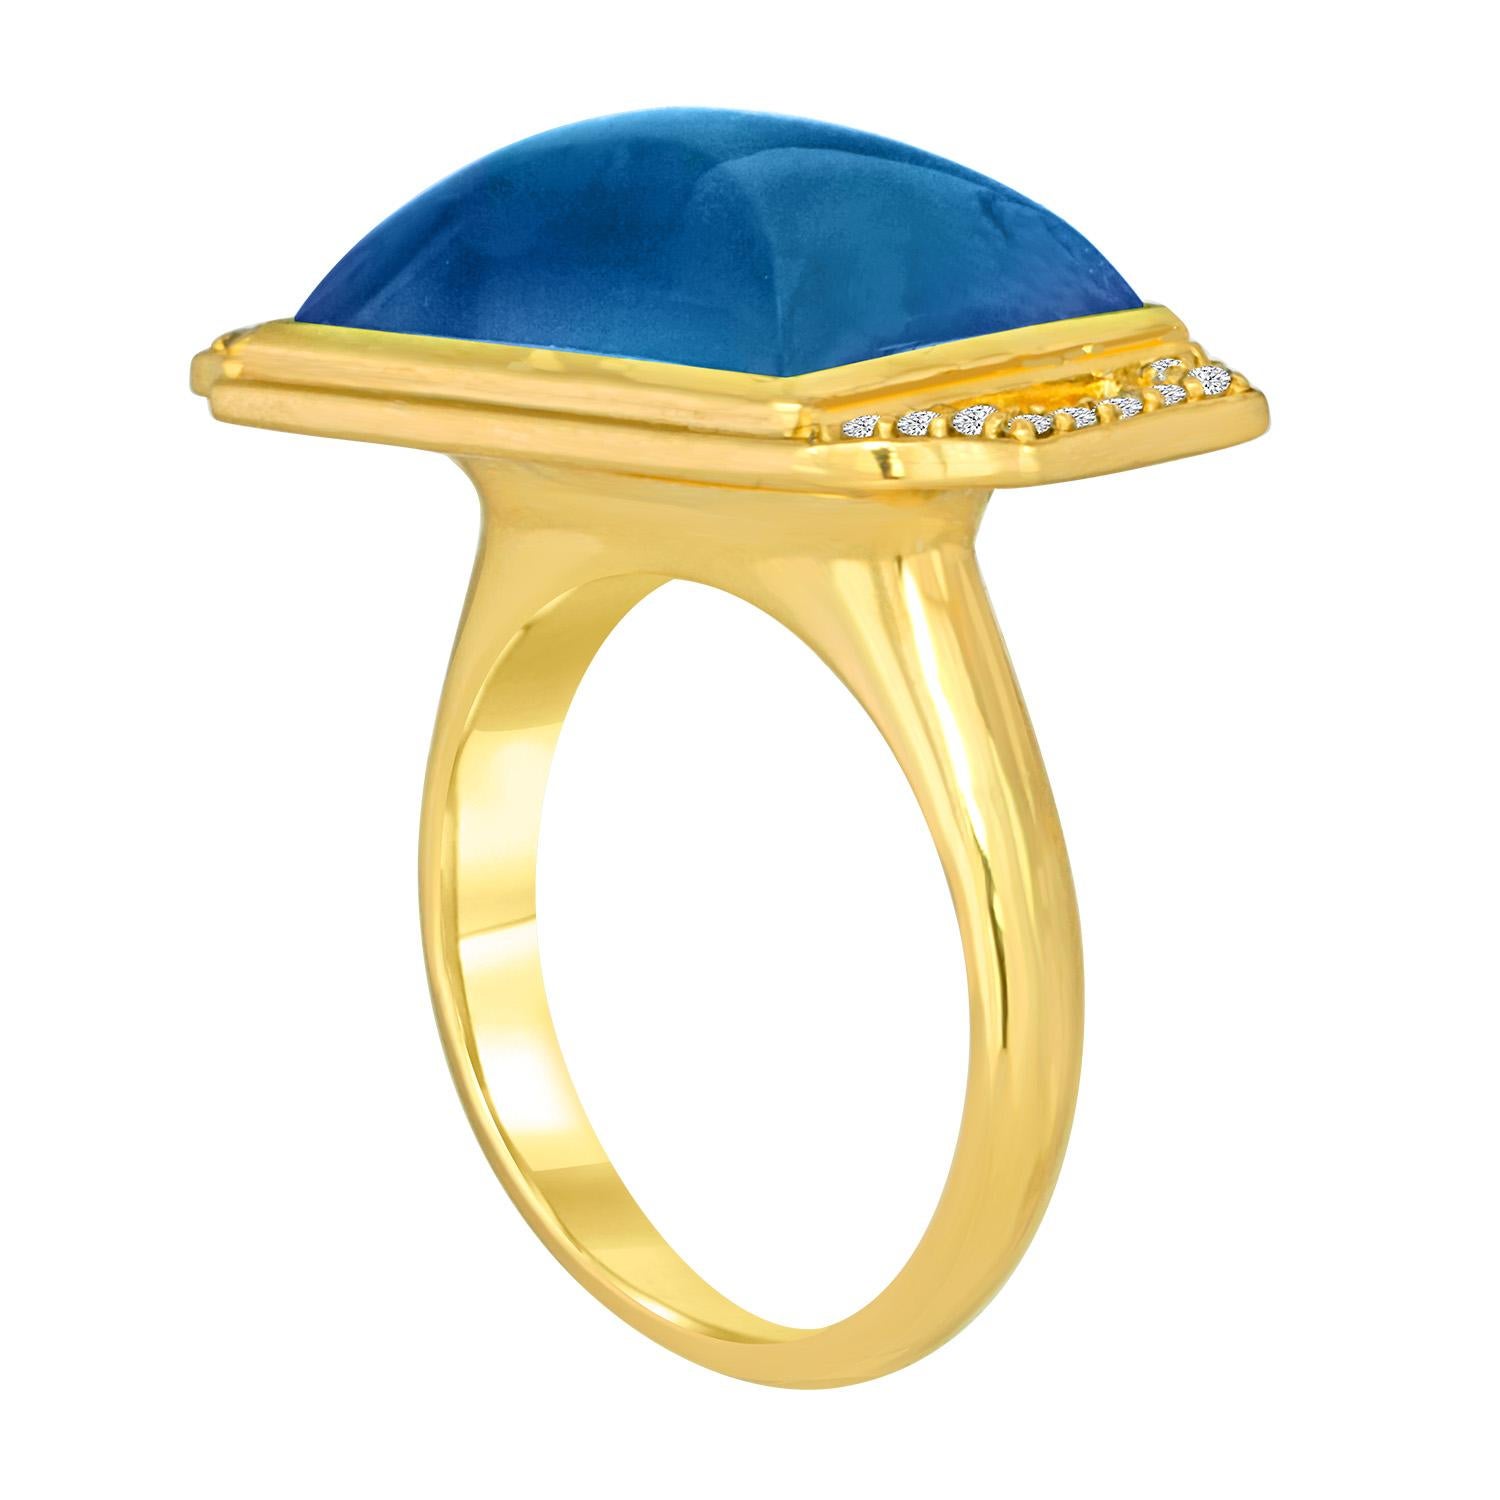 You need no other jewels when wearing this statement ring.  Influenced by Deco designs, this geometric ring features a large custom cut, luminescent Labradorite.  The diamond elements flanking the center stone add a high fashion element to the